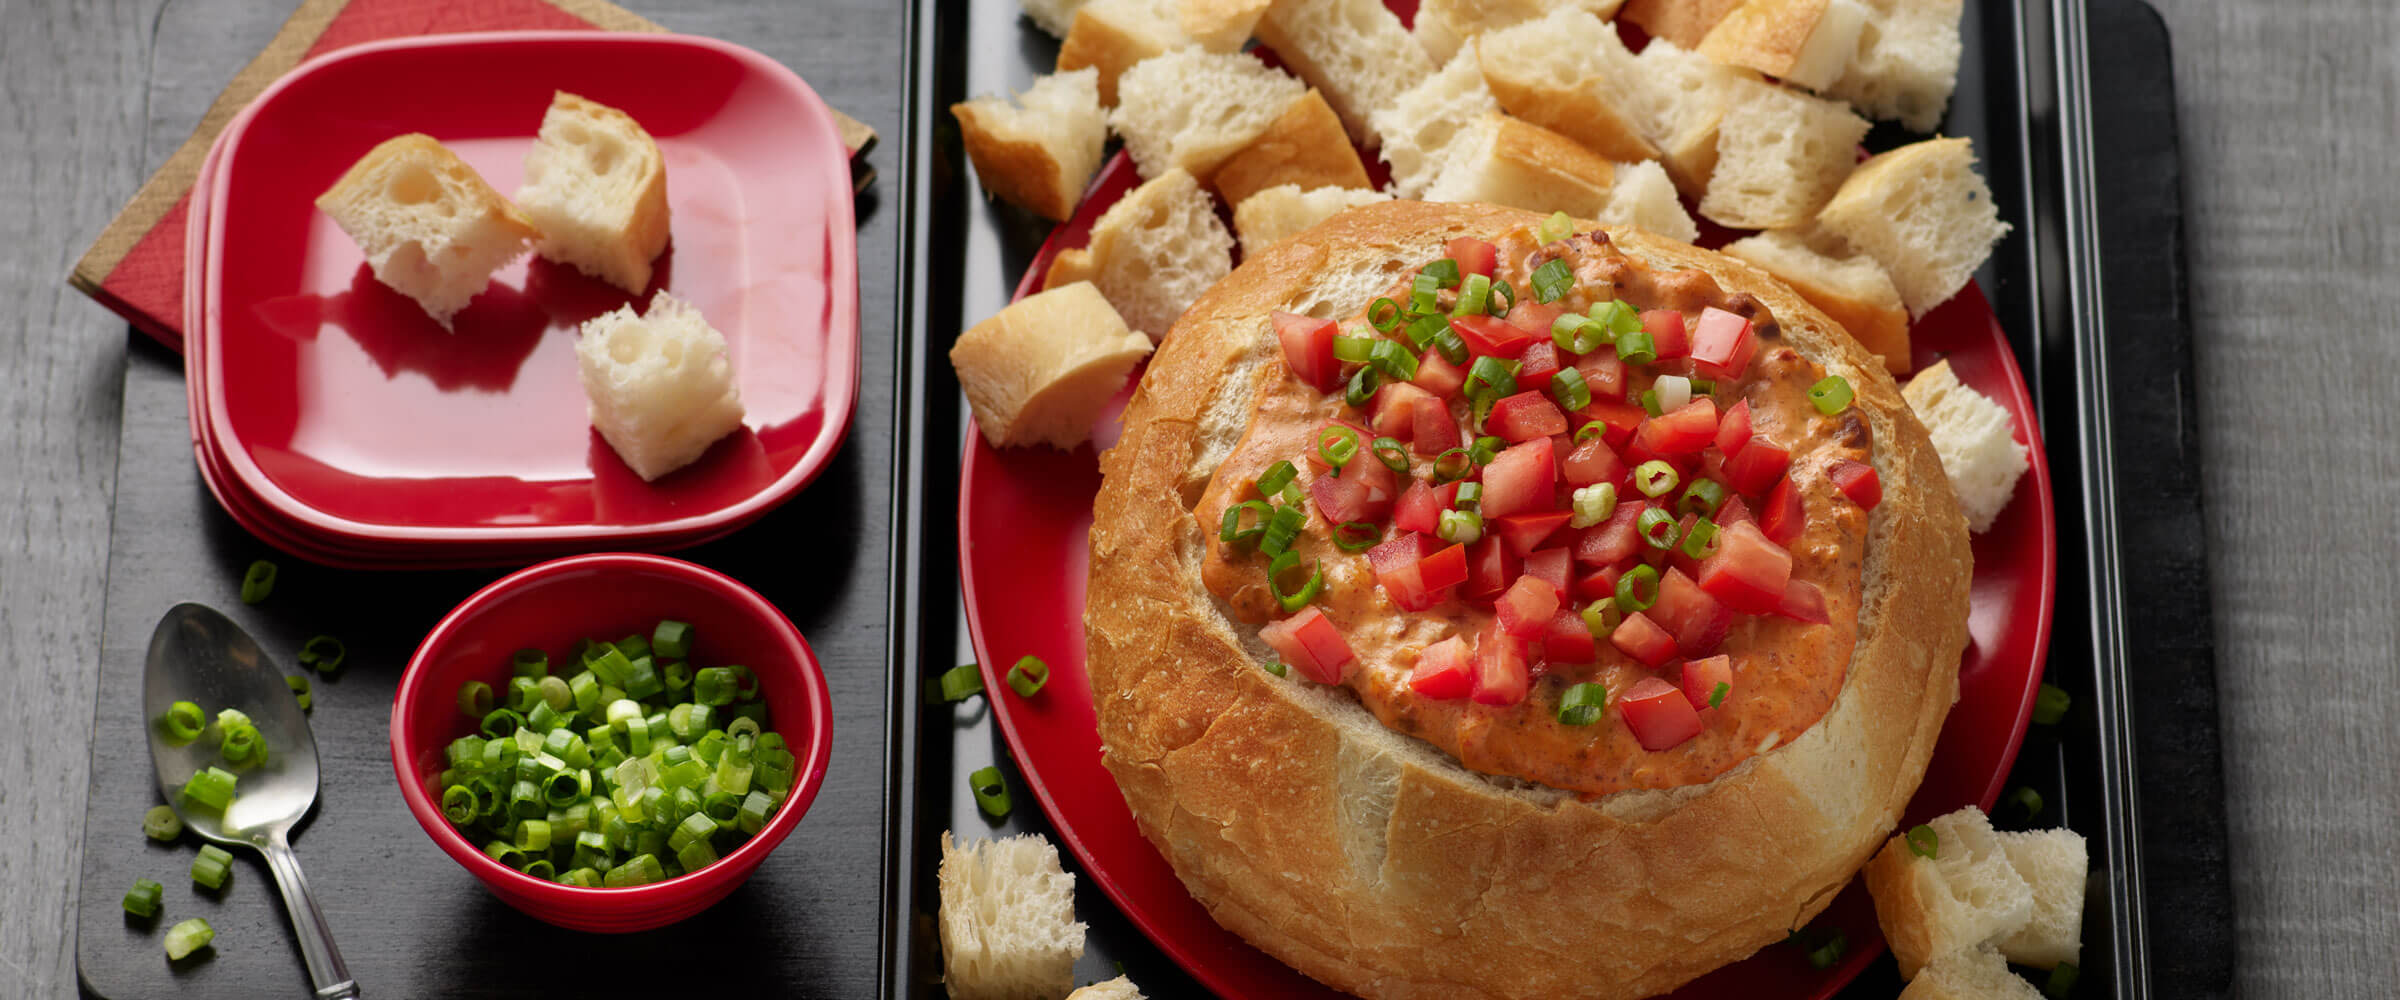 Sourdough Chili Dip topped with tomatoes and green onions with pieces of bread for dipping